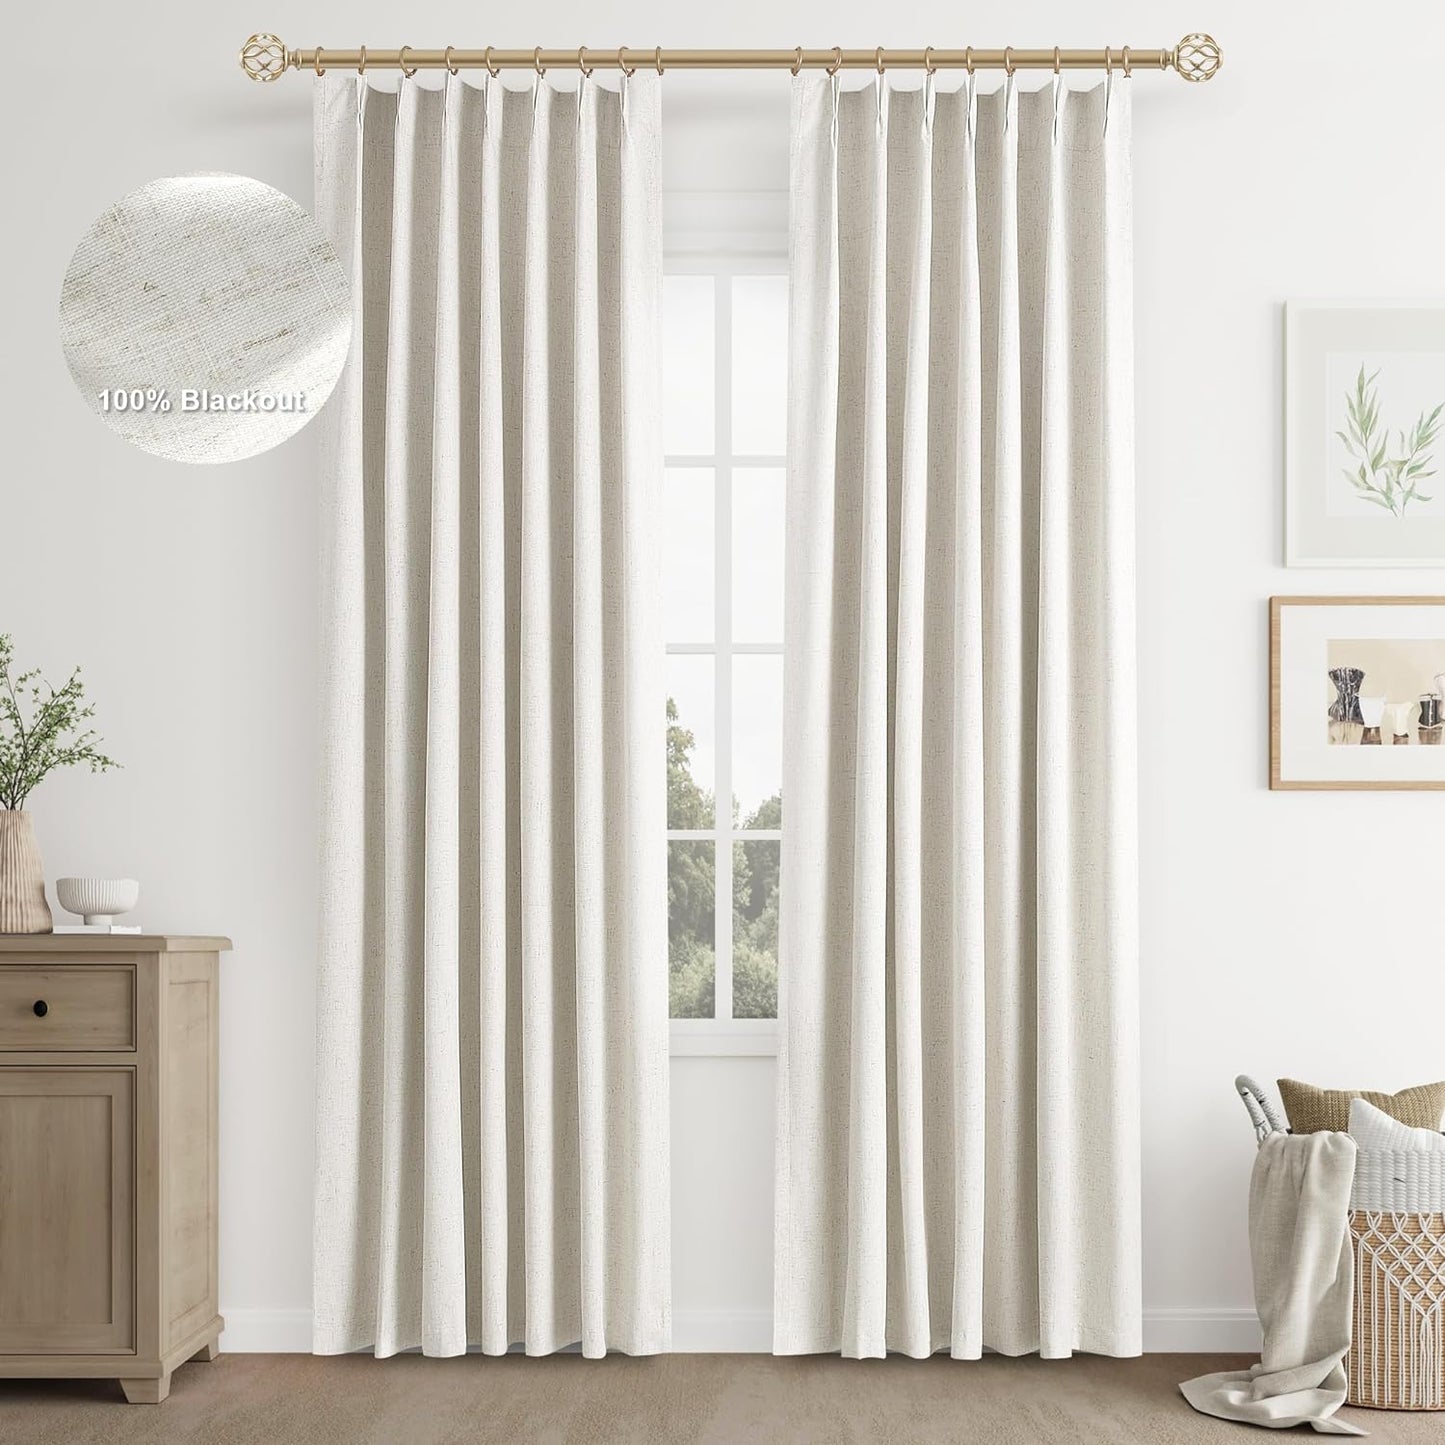 Joywell Cream Ivory Linen 100% Blackout Curtains 84 Inches Long,Pinch Pleated Back Tab Drapes with Hooks Light Blocking Thermal Insulated for Bedroom Living Room,W40 X L84,Natural Beige,2 Panels  Joywell Natural Beige 40W X 96L Inch X 2 Panels 